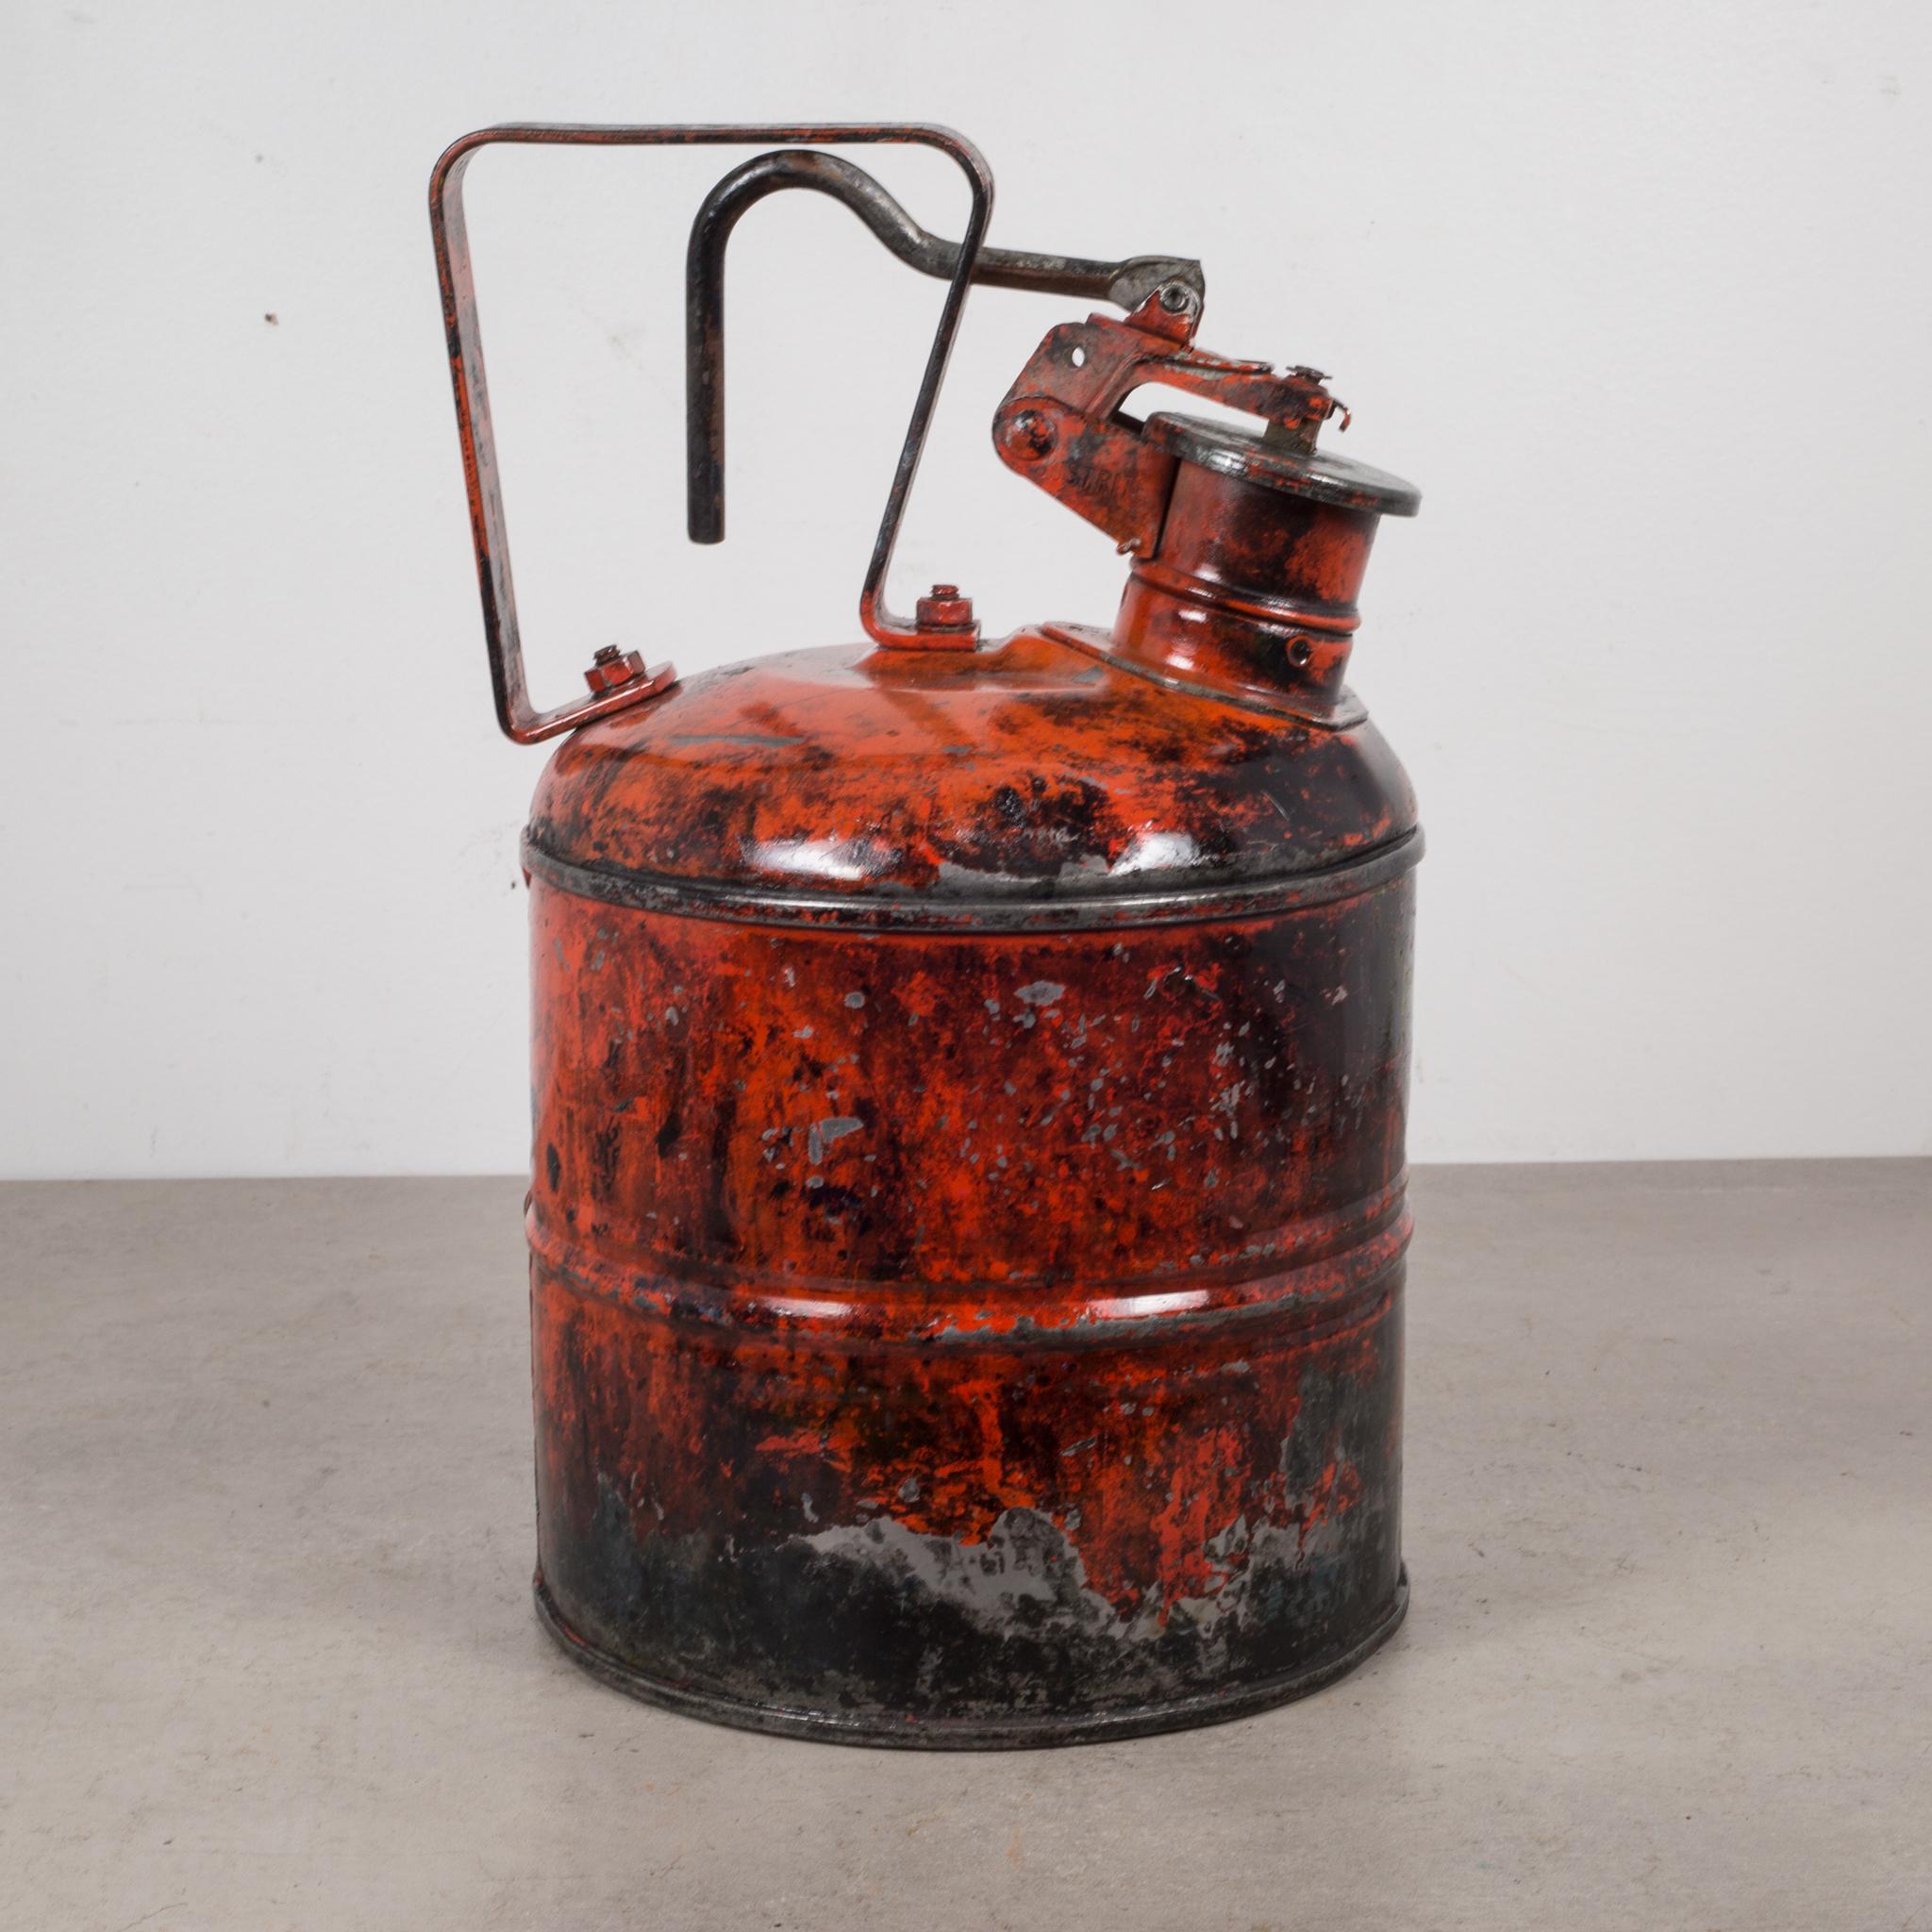 Industrial Vintage Safety Gas Can, circa 1940